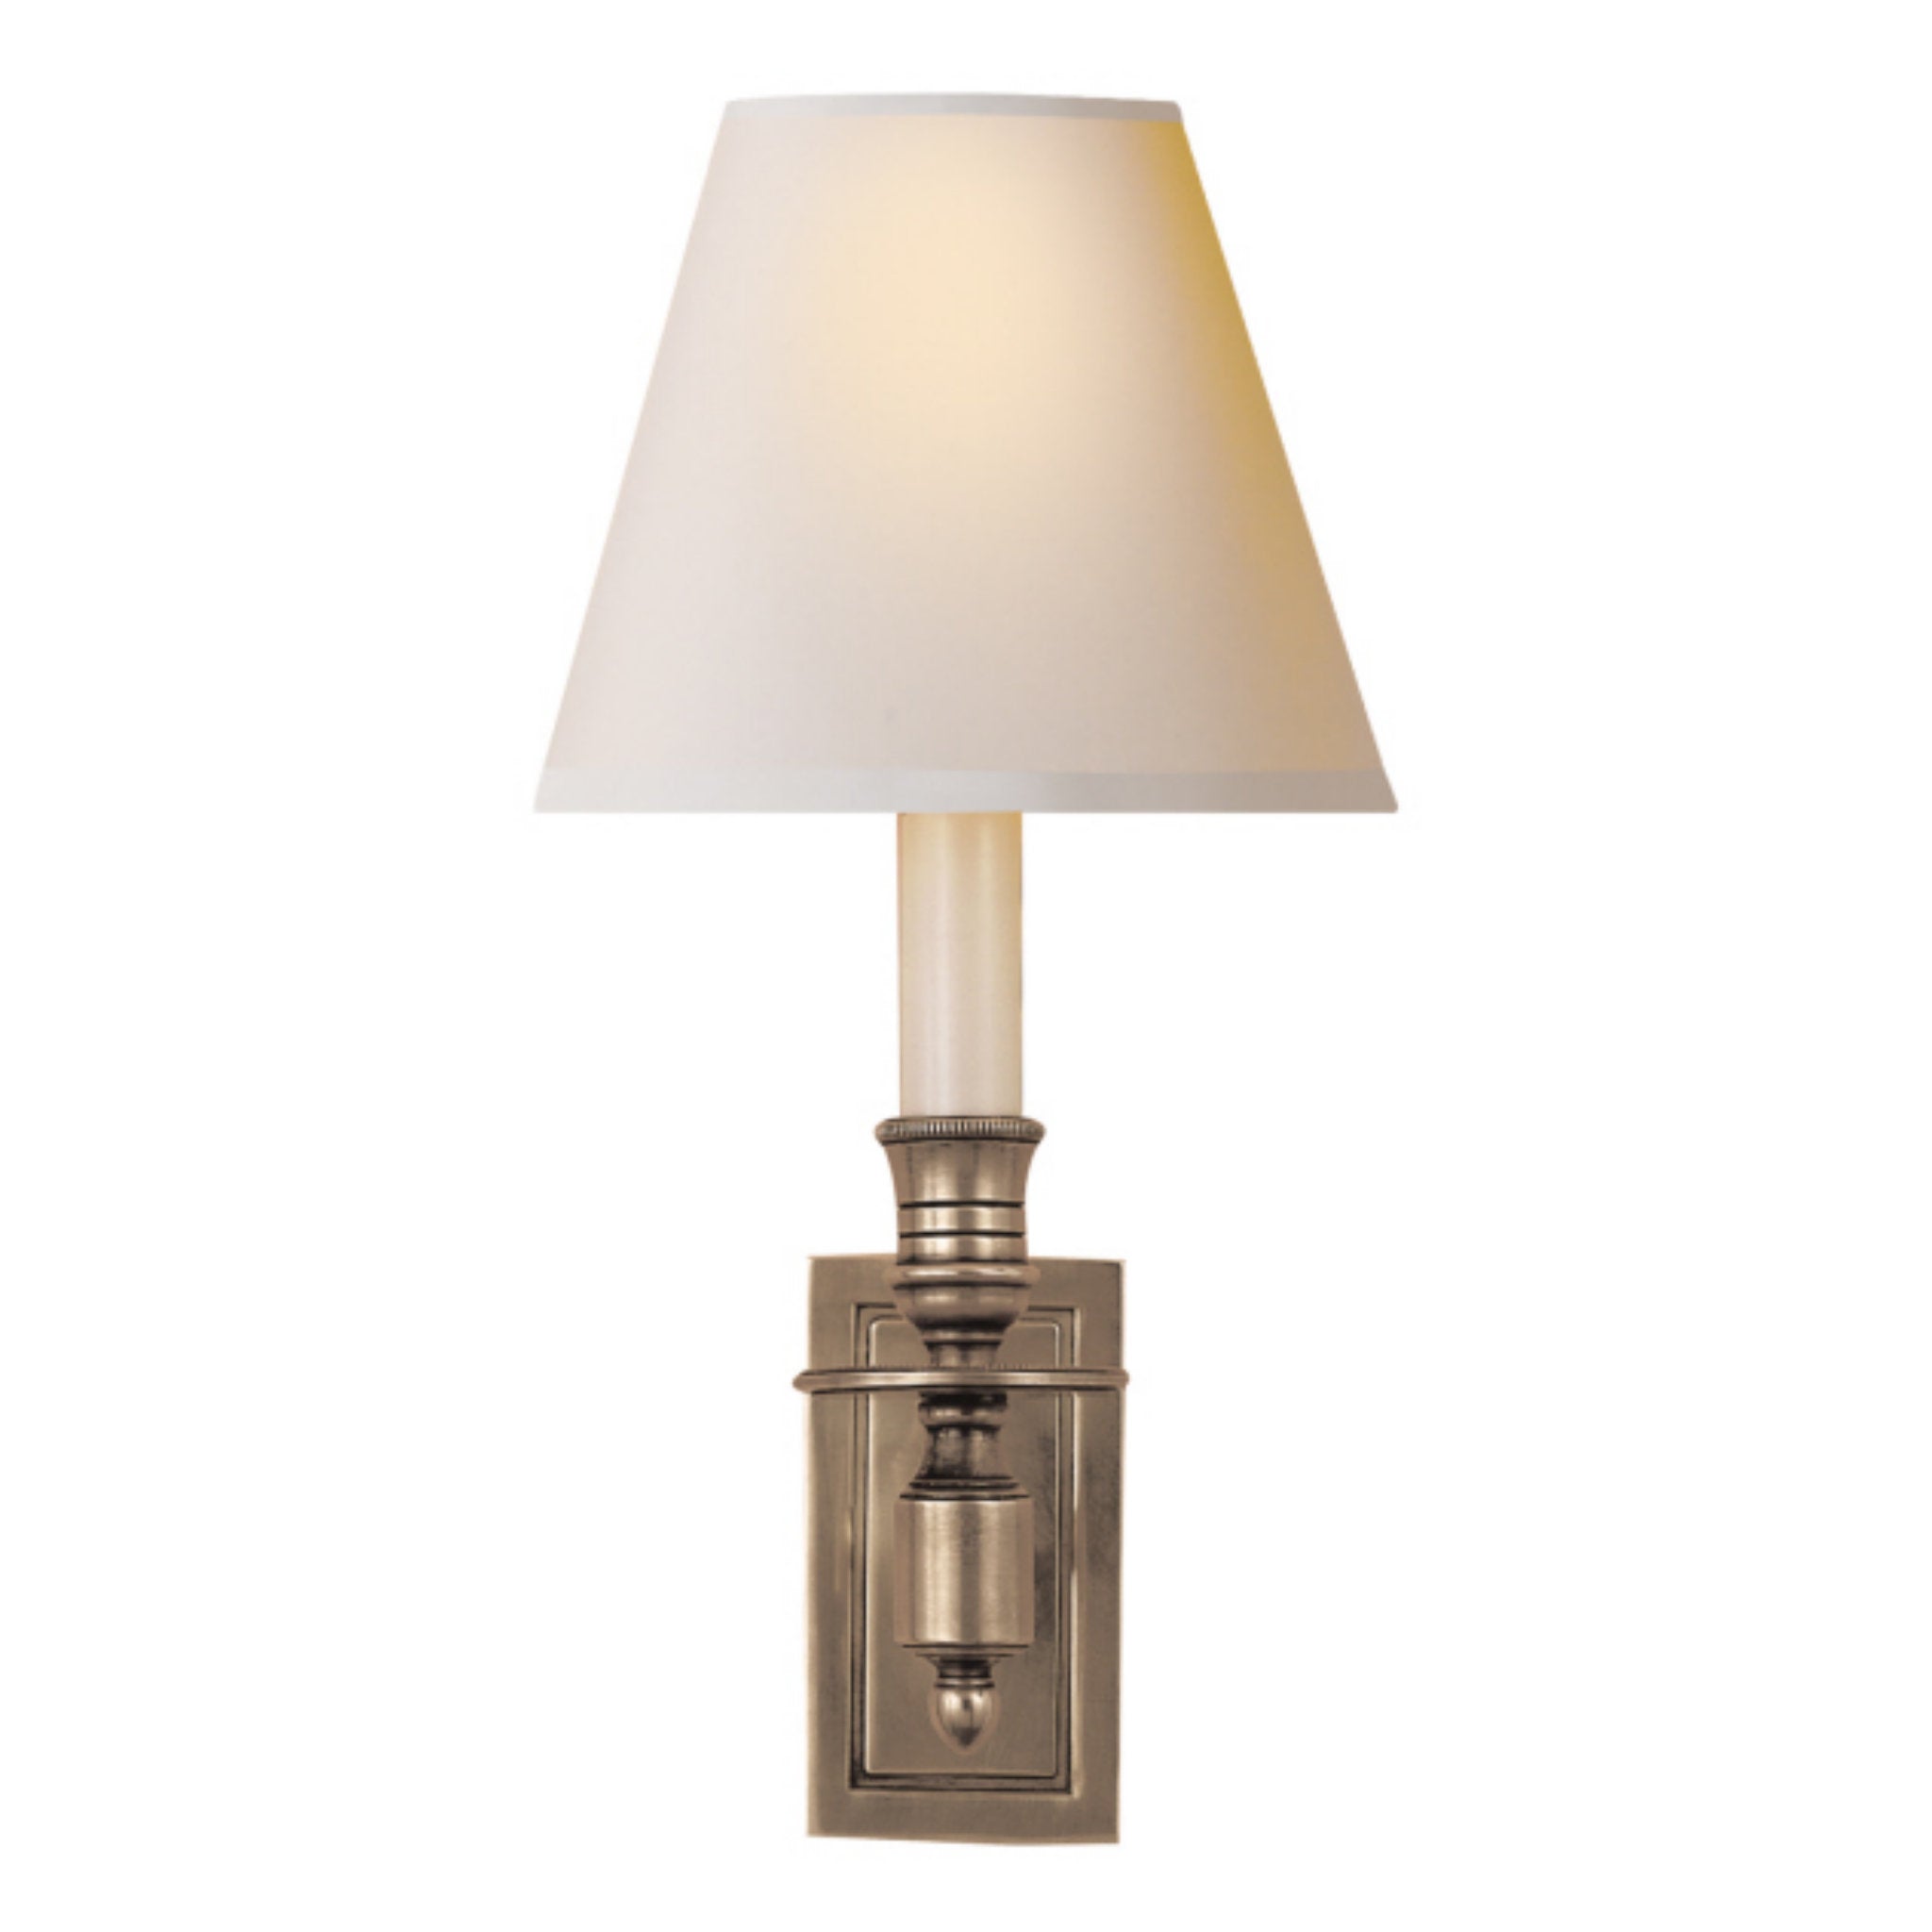 Visual Comfort French Single Library Sconce in Antique Nickel with Natural Paper Shade